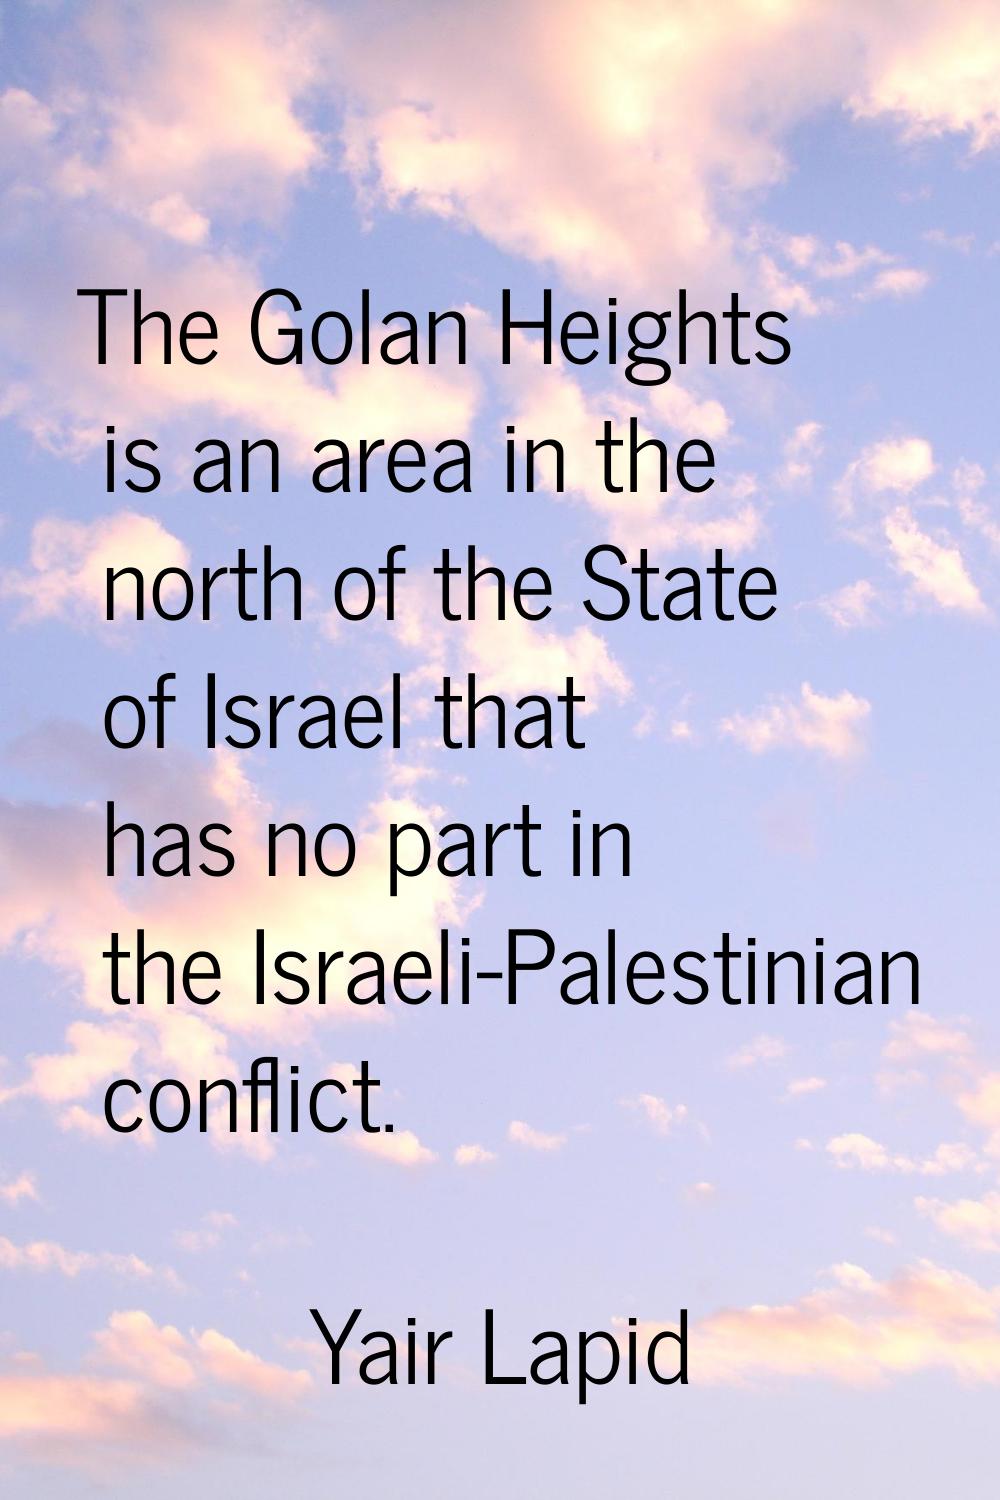 The Golan Heights is an area in the north of the State of Israel that has no part in the Israeli-Pa